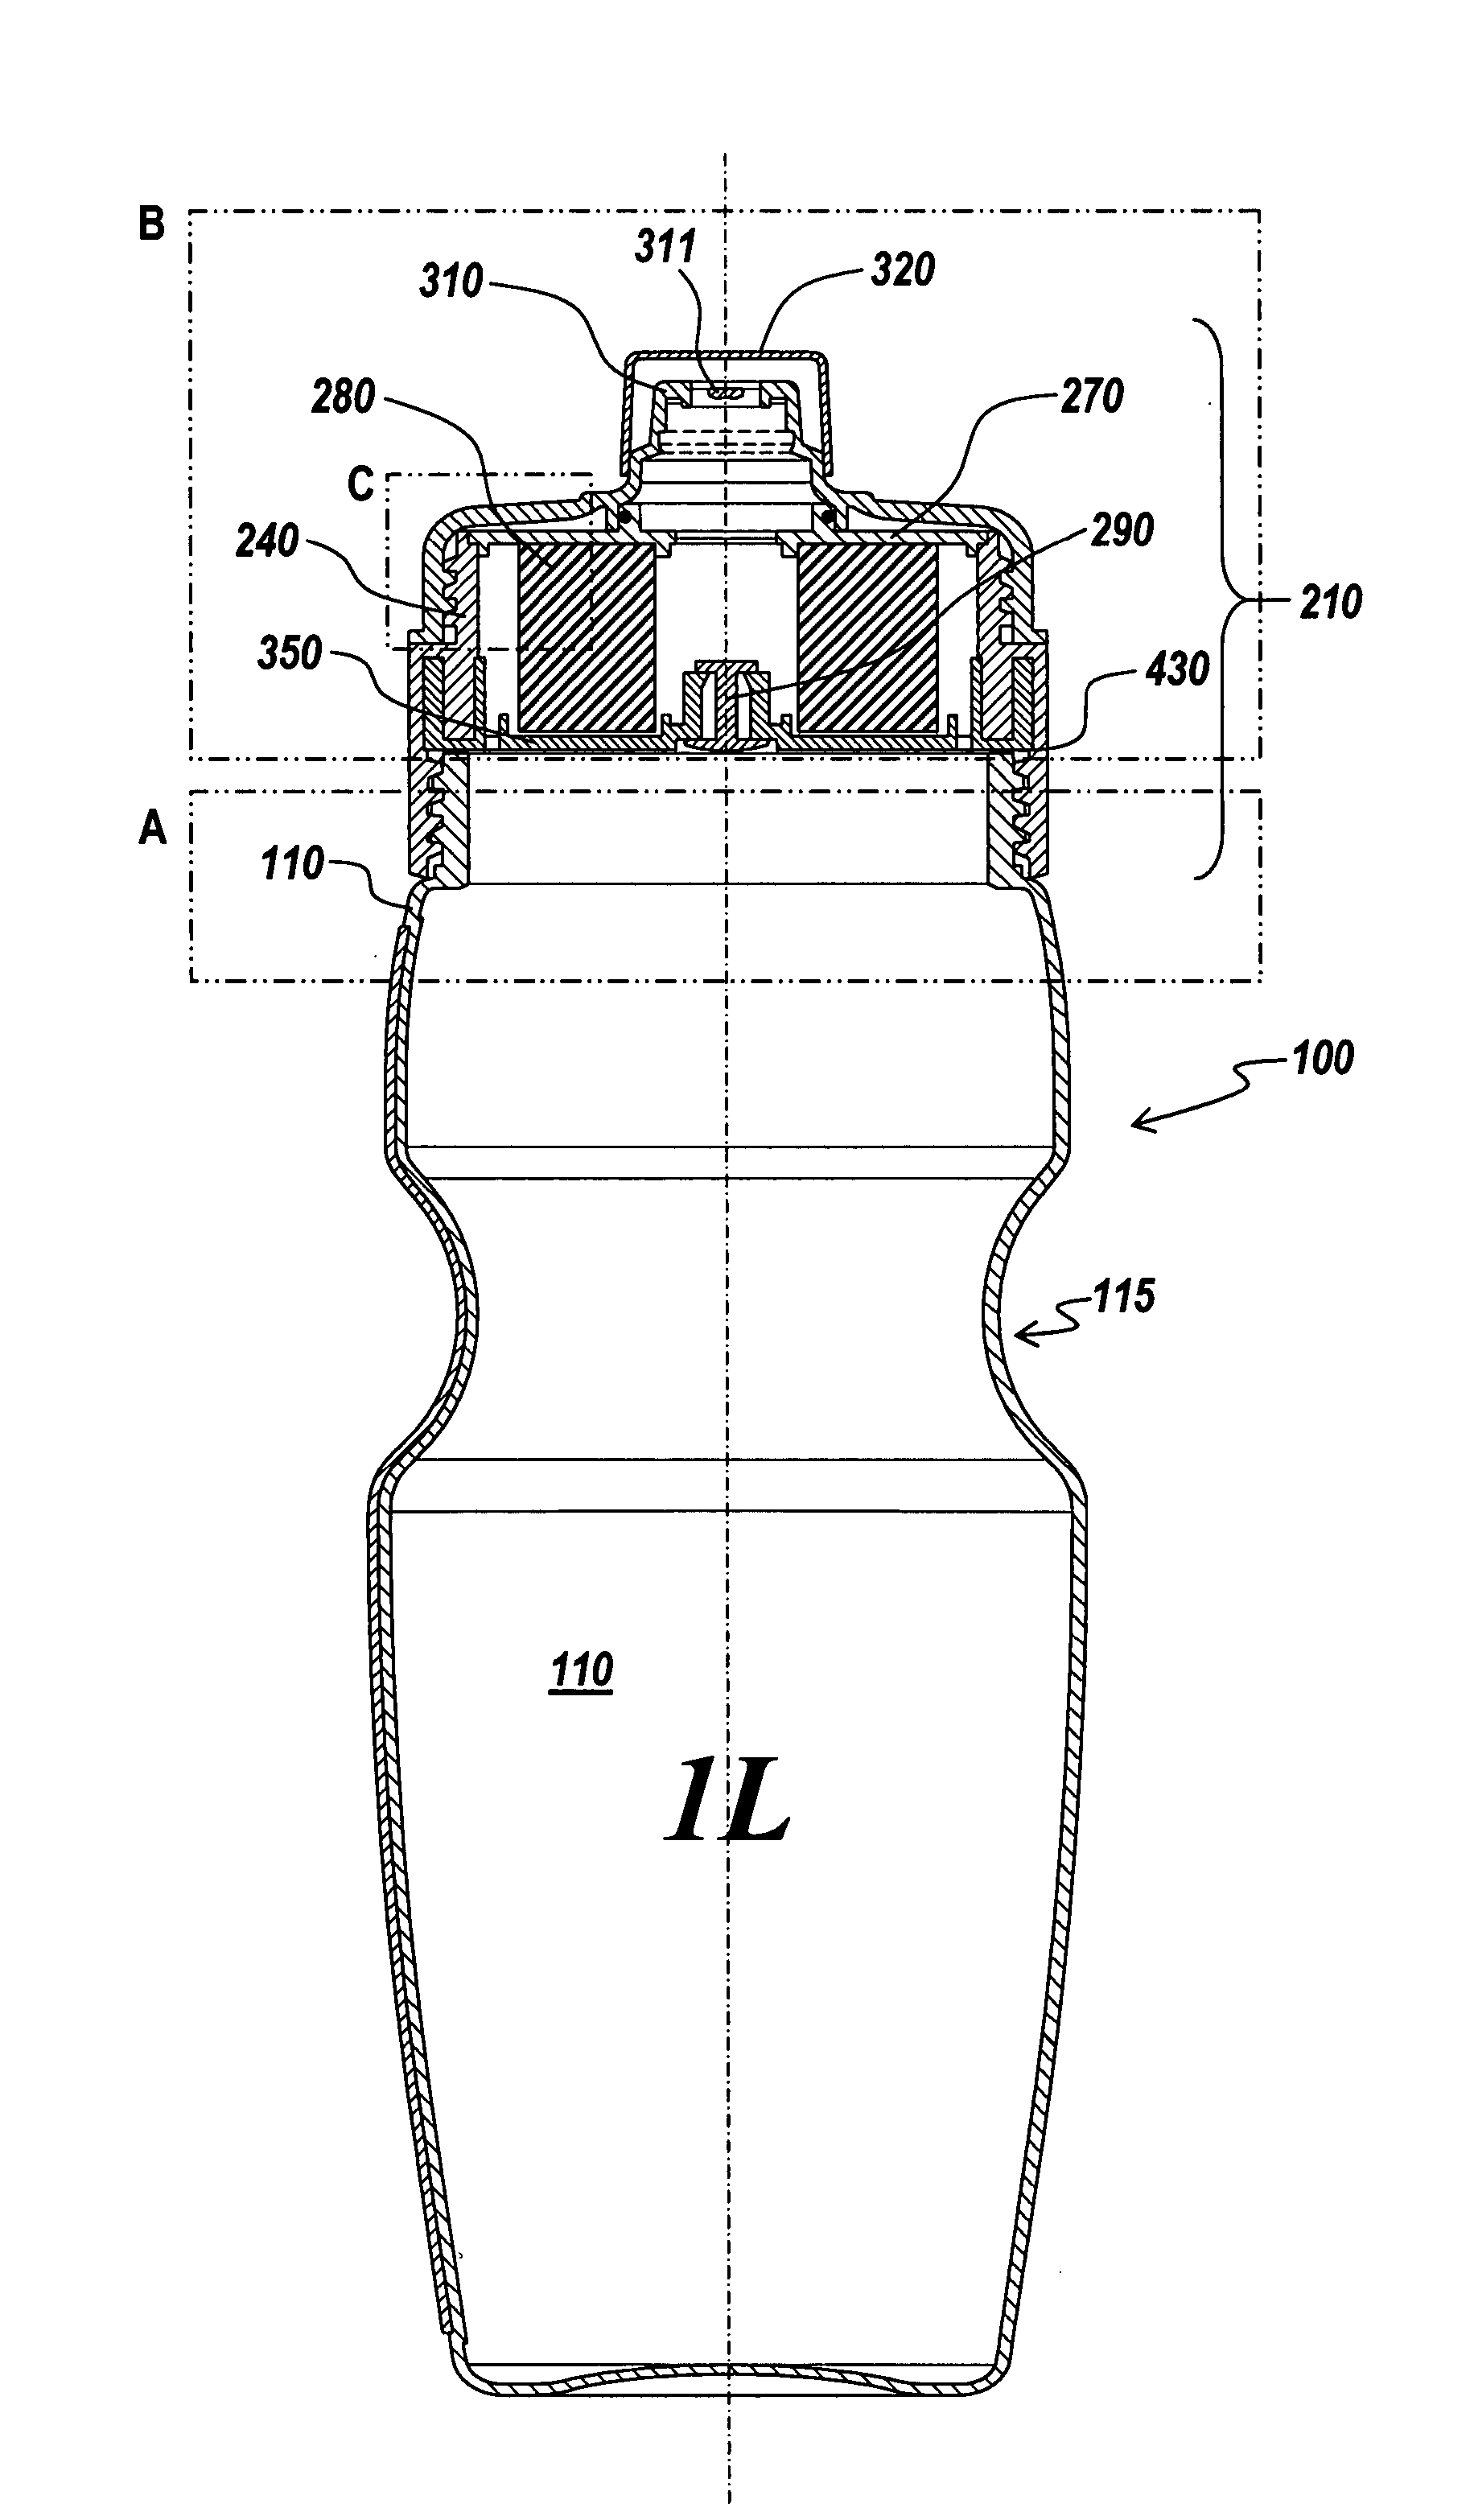 System and method for dispensing a filtered liquid